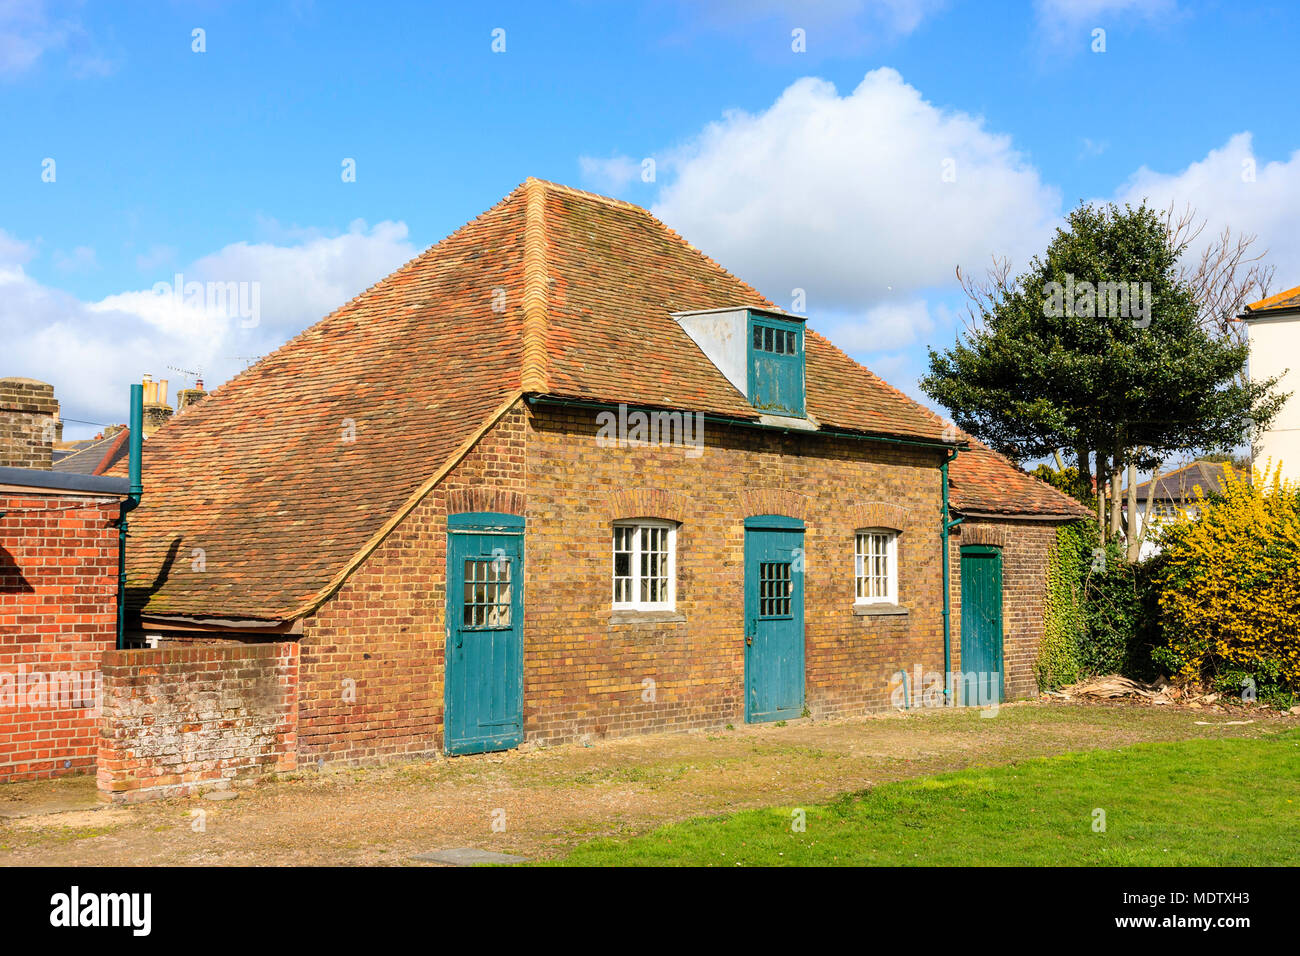 England, Deal castle. Napoleonic storehouse opposite the castle. Single storey building with attic window. Green doors. Daytime, blue skies. Stock Photo